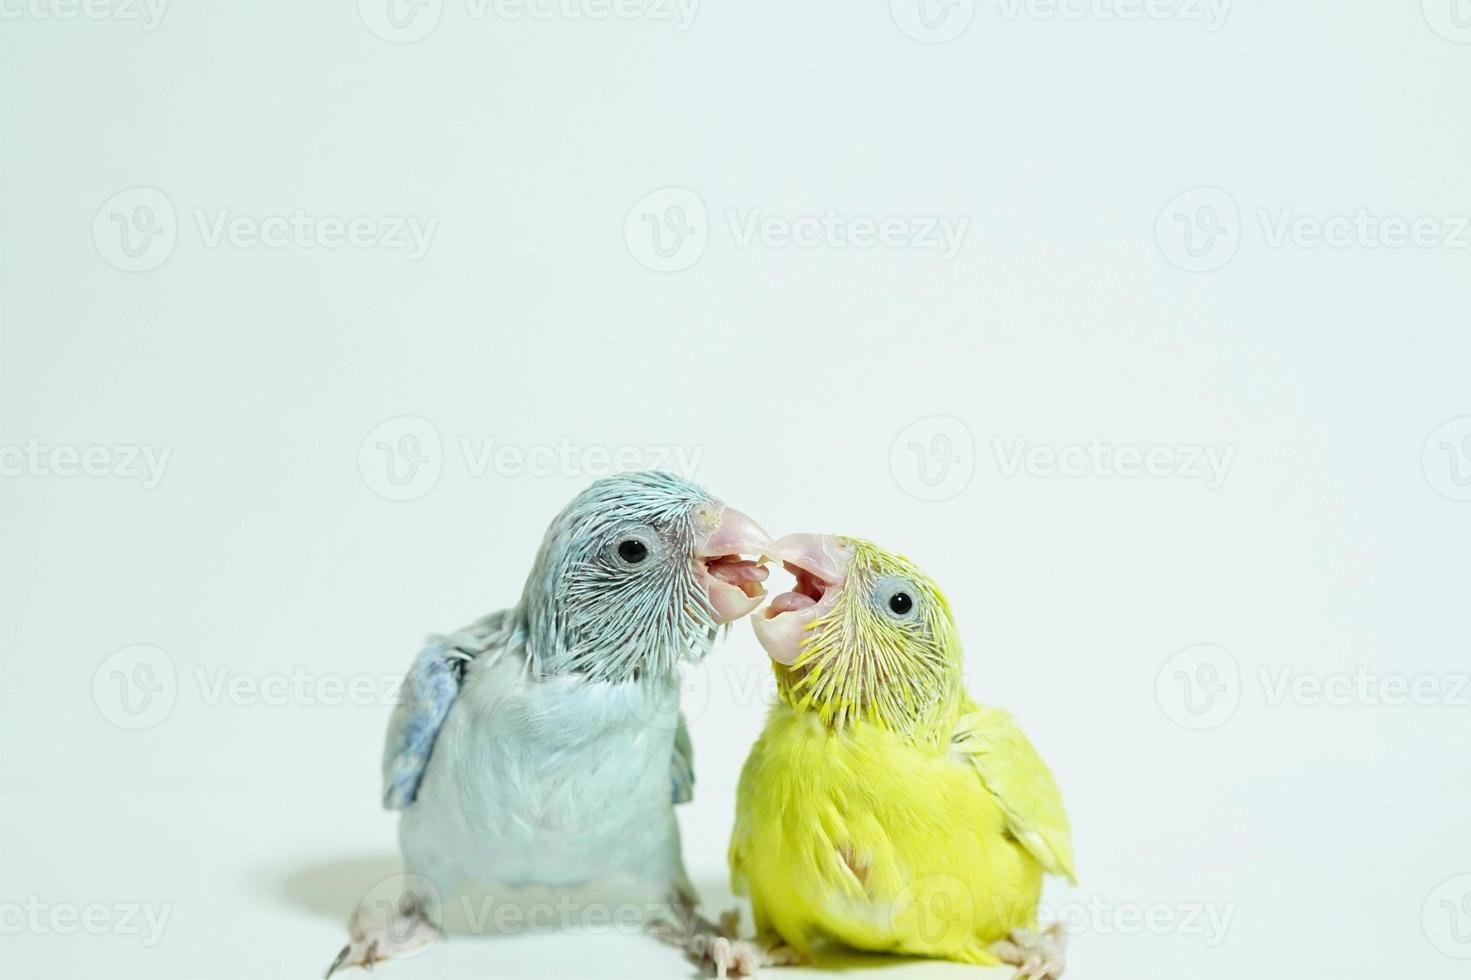 Forpus 2 baby bird newborn American yellow and white color sibling pets feeding each other standing on white background, the domestic animal is the smallest parrot in the world. photo